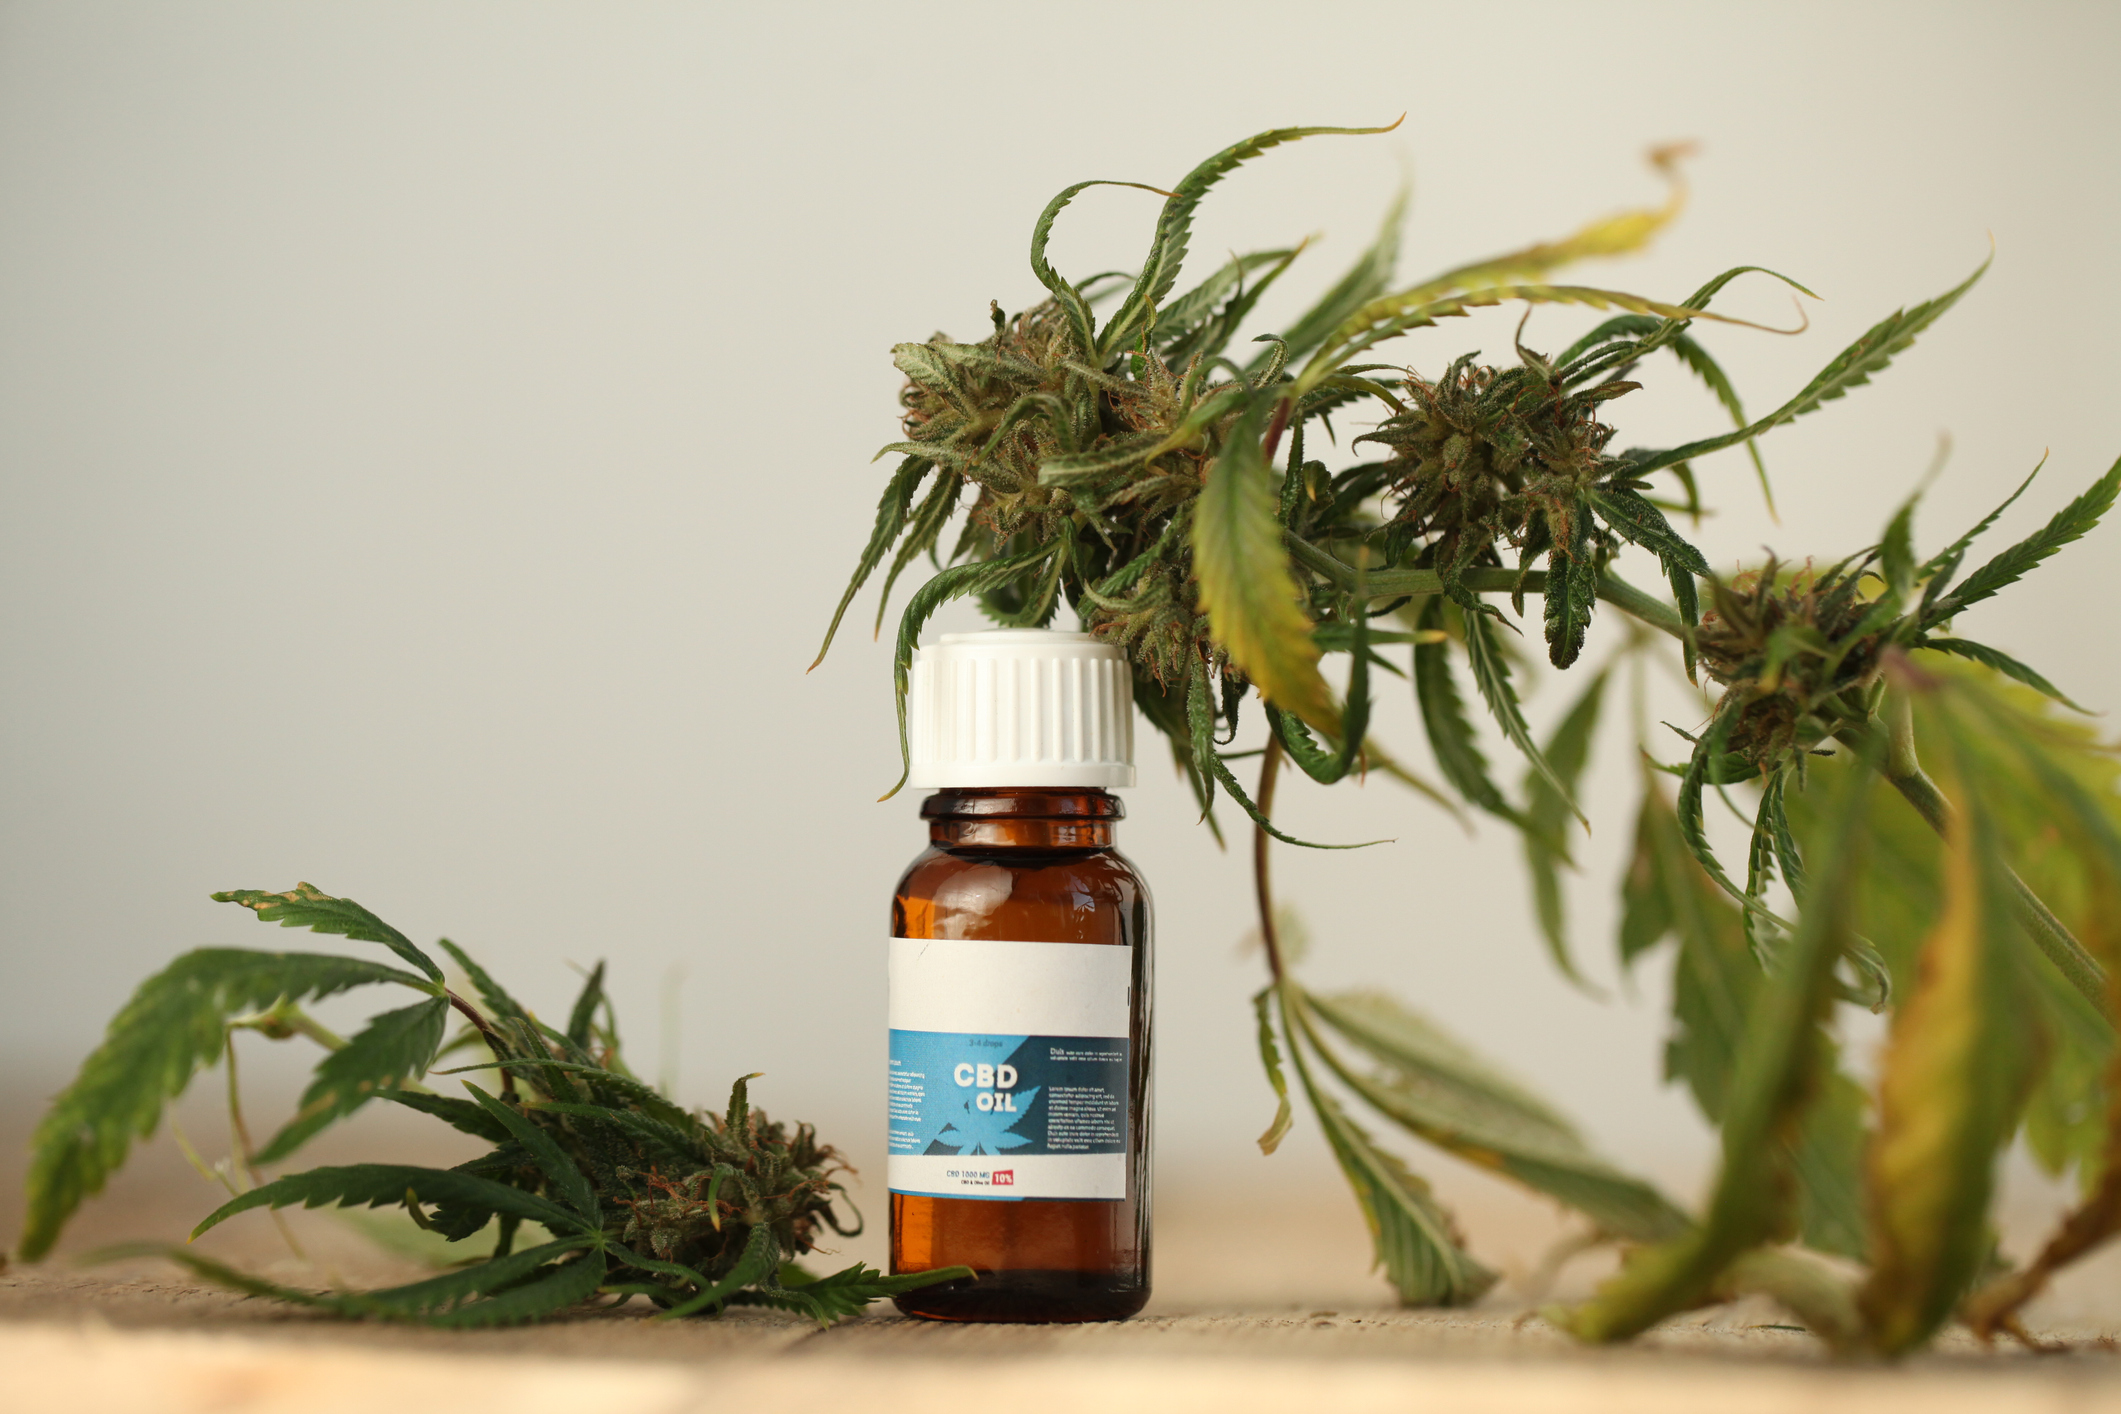 32 Things You Need To Know About CBD Before You Try It